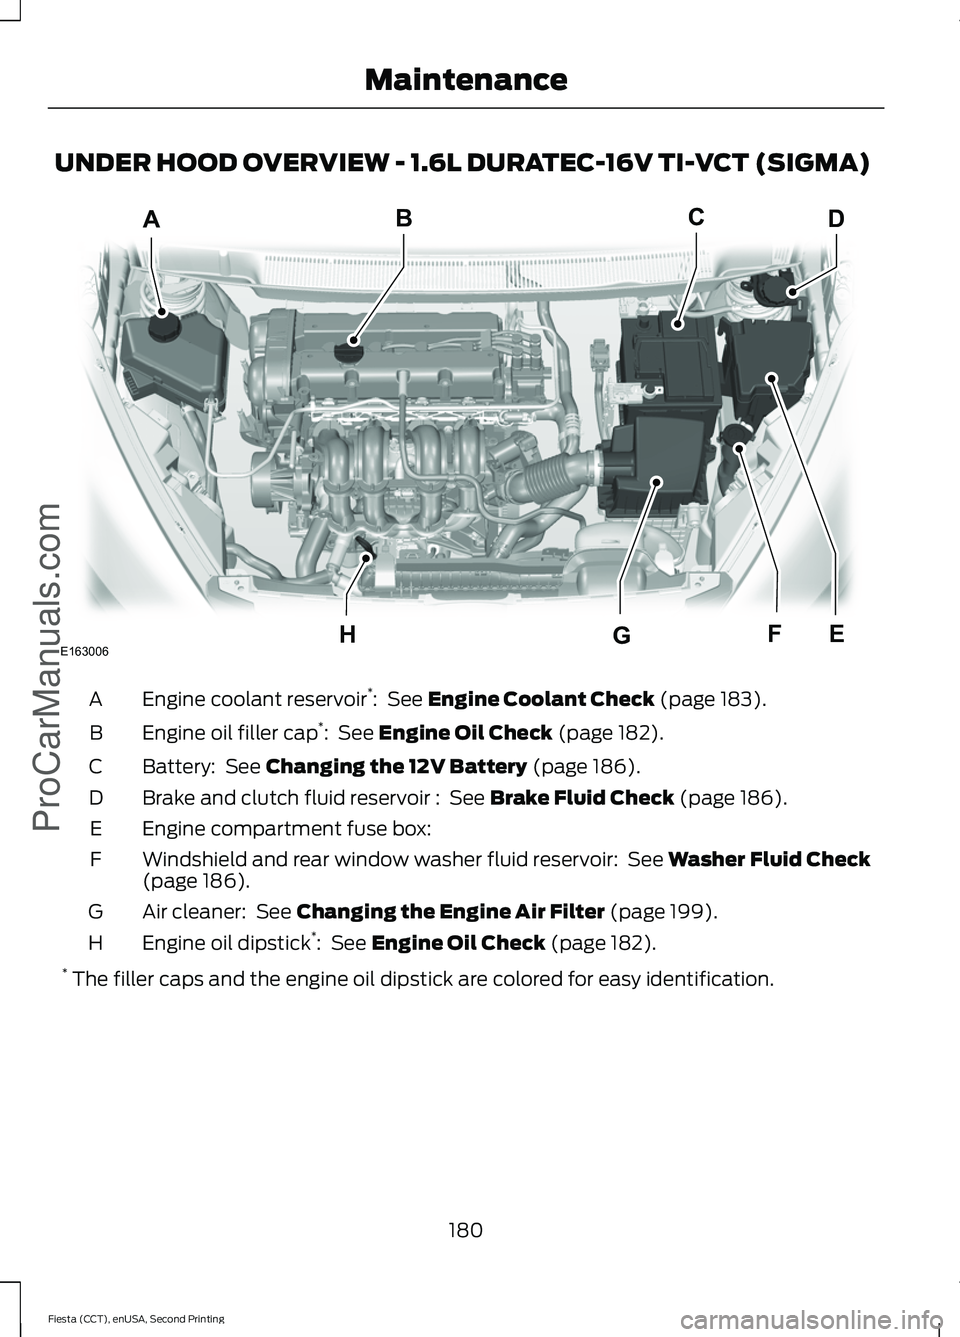 FORD FIESTA 2015  Owners Manual UNDER HOOD OVERVIEW - 1.6L DURATEC-16V TI-VCT (SIGMA)
Engine coolant reservoir
*
:  See Engine Coolant Check (page 183).
A
Engine oil filler cap *
: 
 See Engine Oil Check (page 182).
B
Battery: 
 See